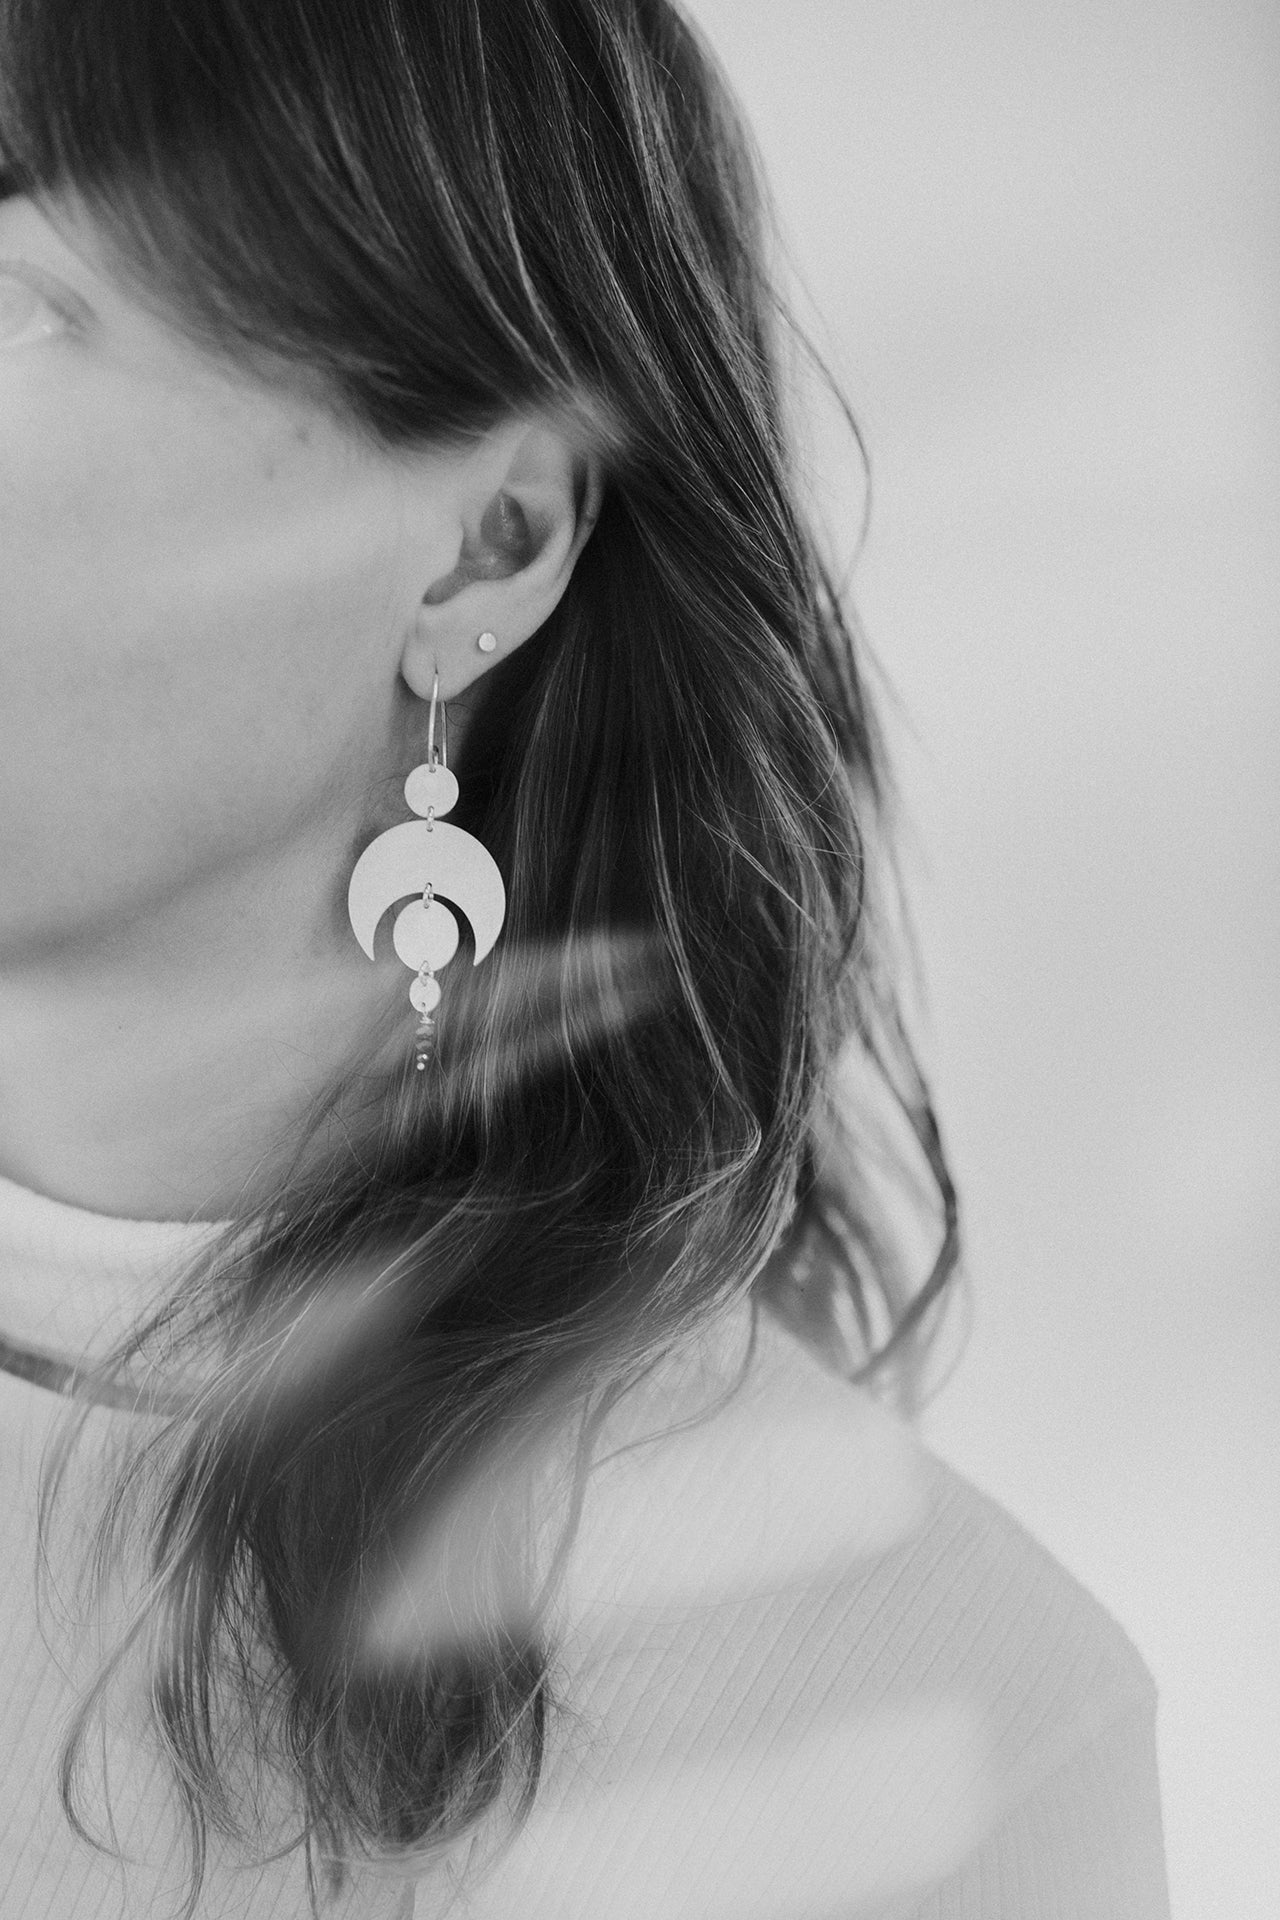 A black and white image of the side profile of a person with long hair. They are wearing the Celestial Earrings by Emily Eliza Arlotte Handcrafted Fine Jewellery. The earrings are large and consist of sterling silver moon and circle shapes.